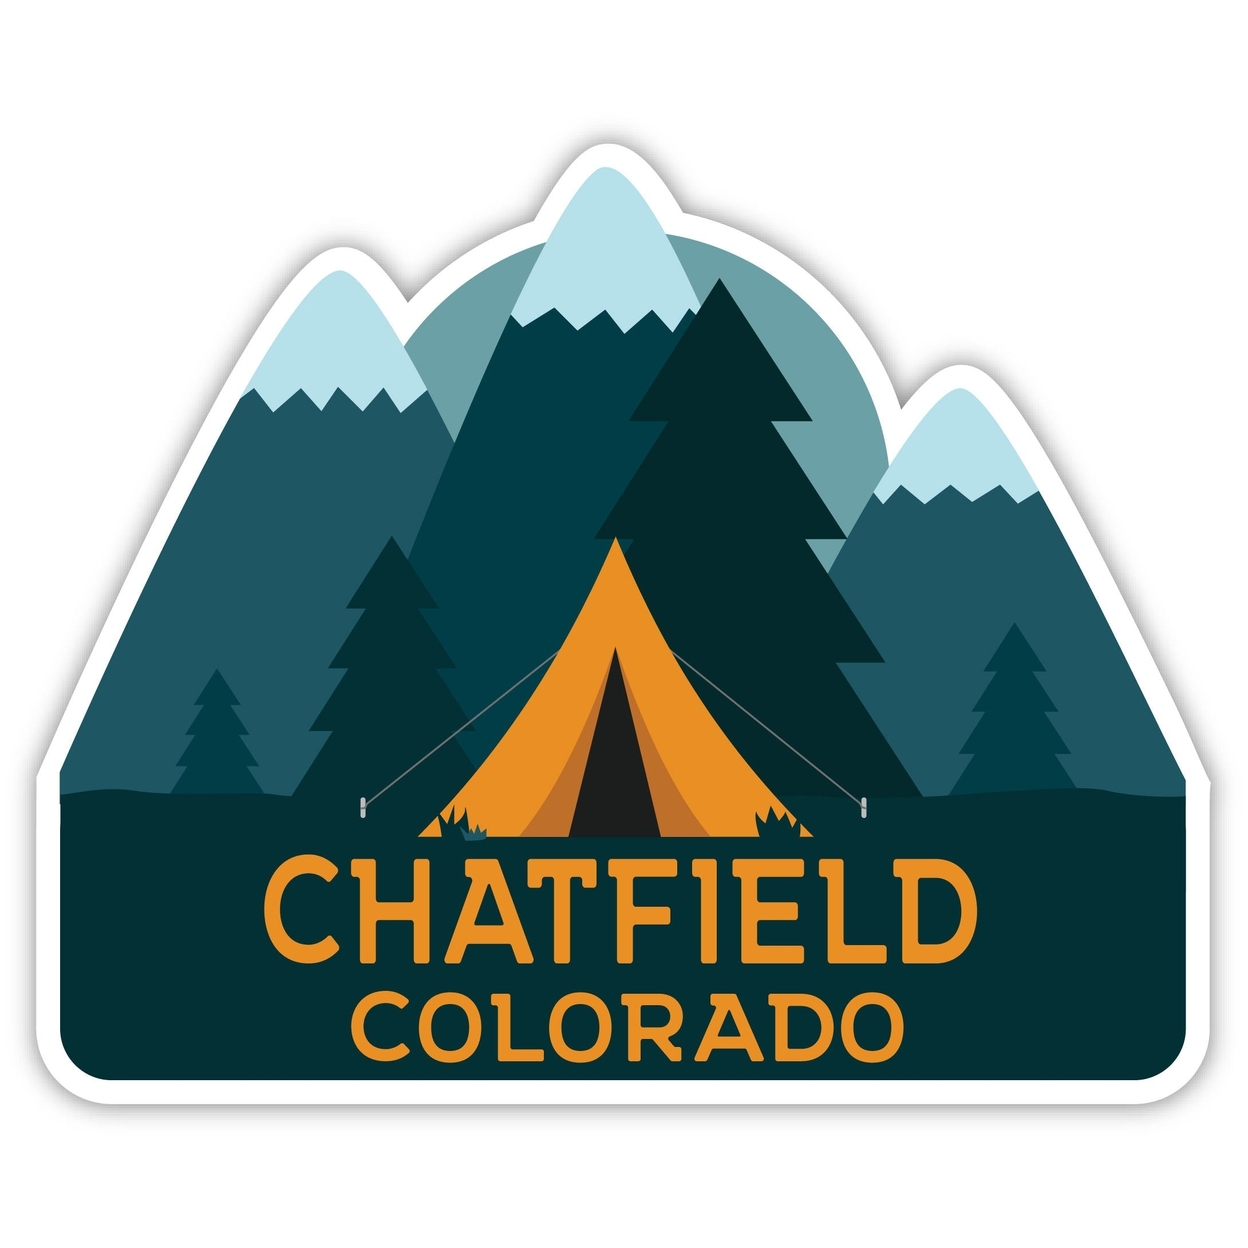 Chatfield Colorado Souvenir Decorative Stickers (Choose Theme And Size) - 4-Pack, 2-Inch, Tent